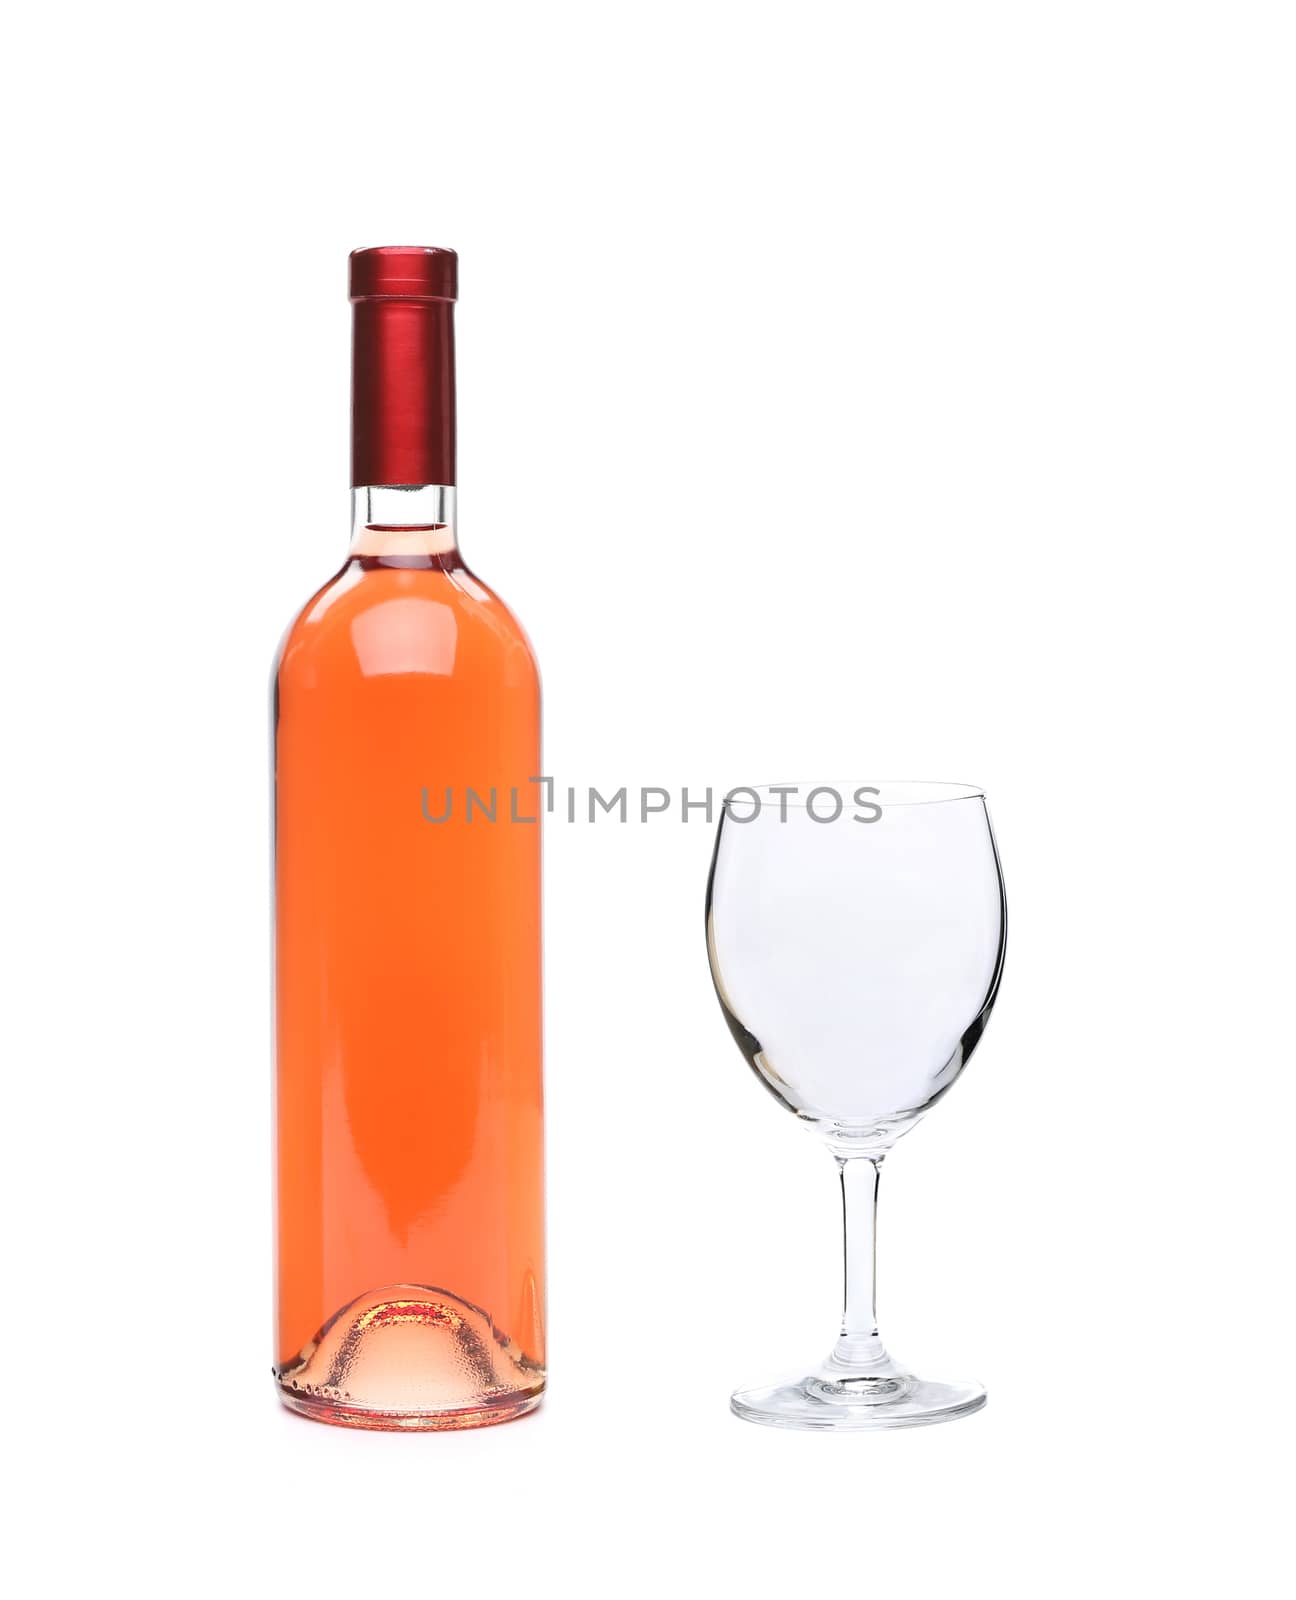 Full pink wine bottle and glass goblet isolated on white background